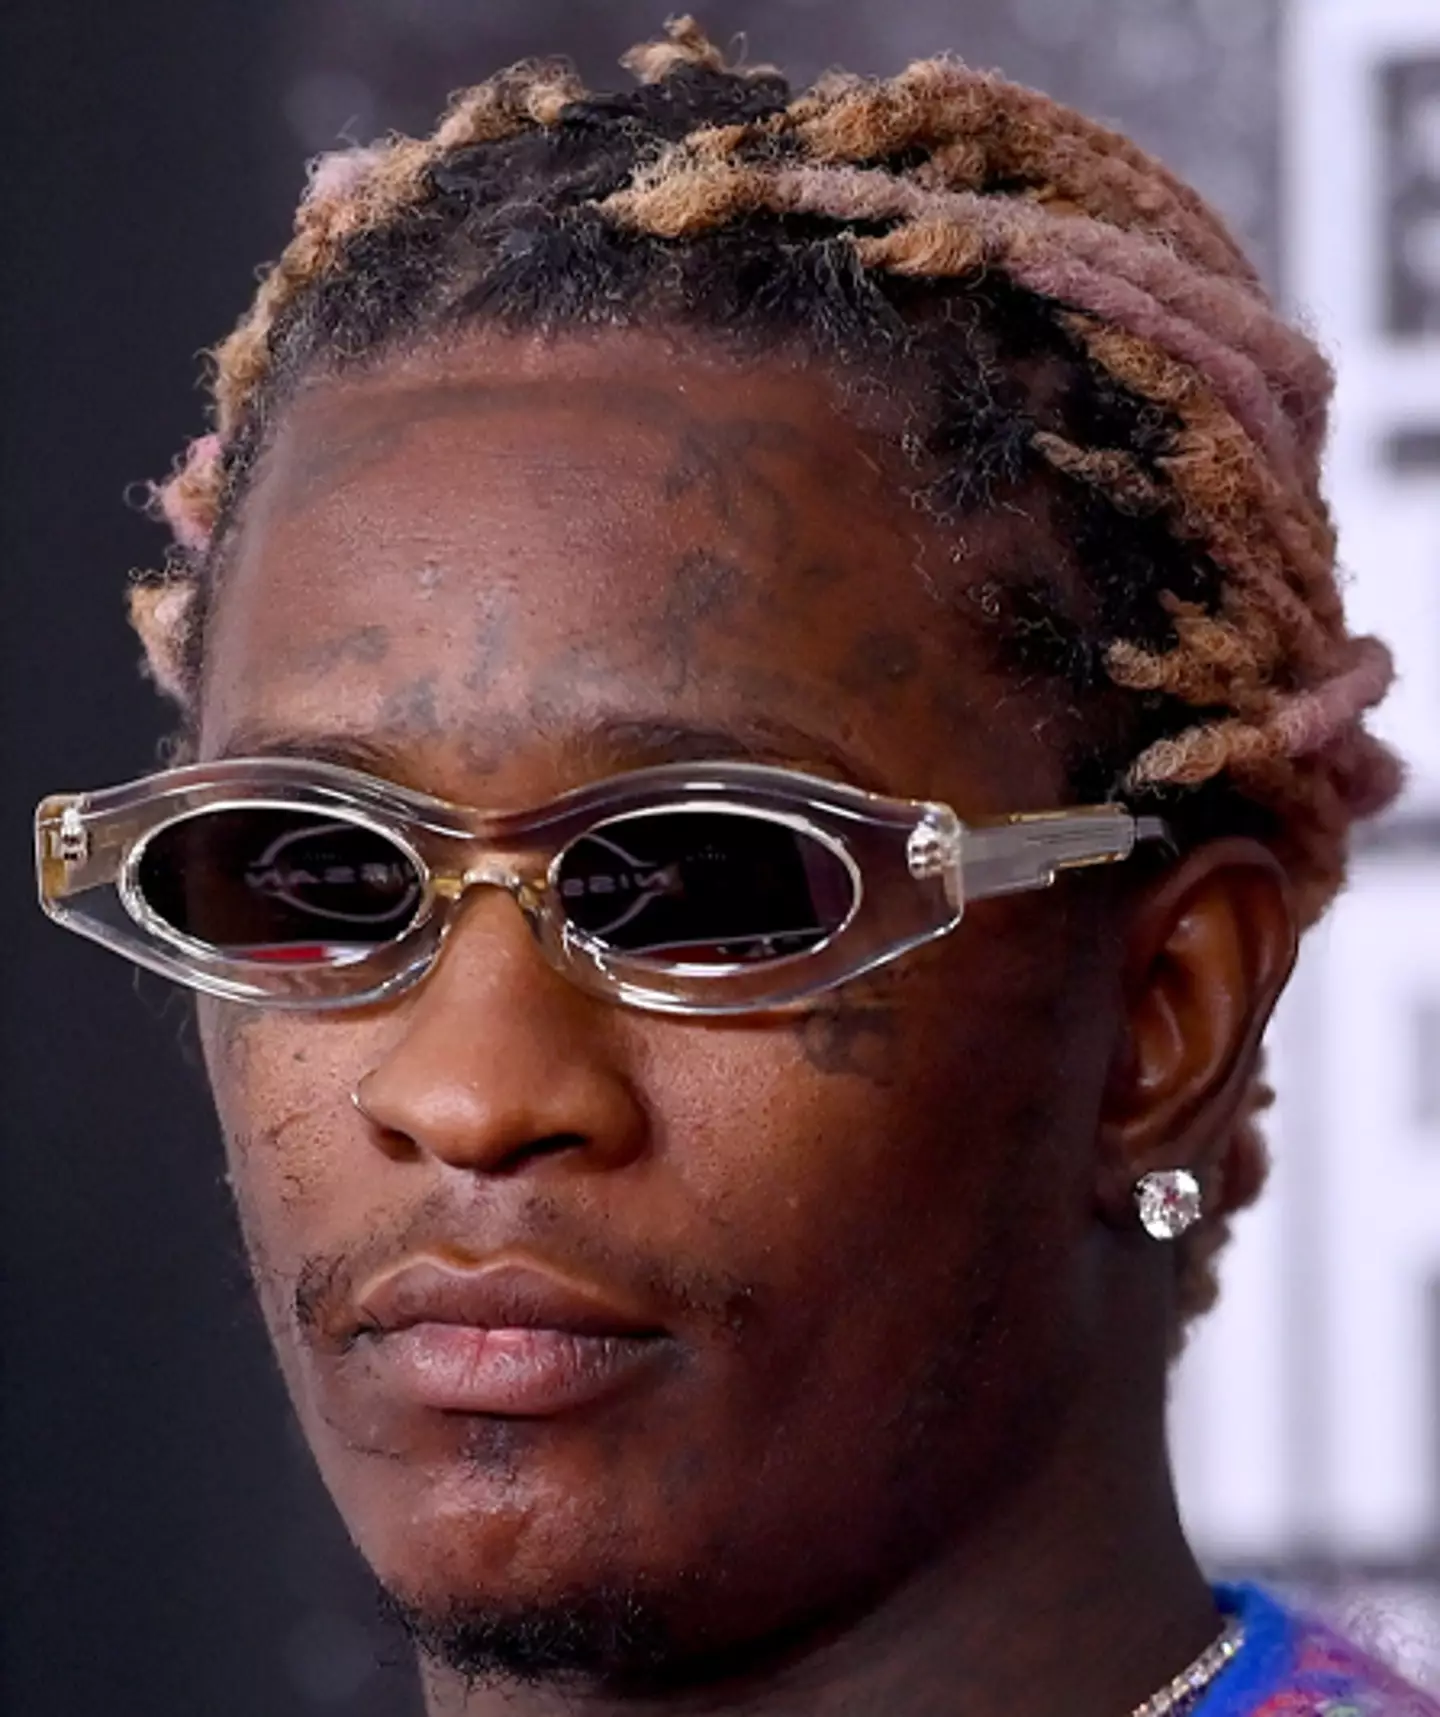 Young Thug's defence lawyers have attracted some negative attention.